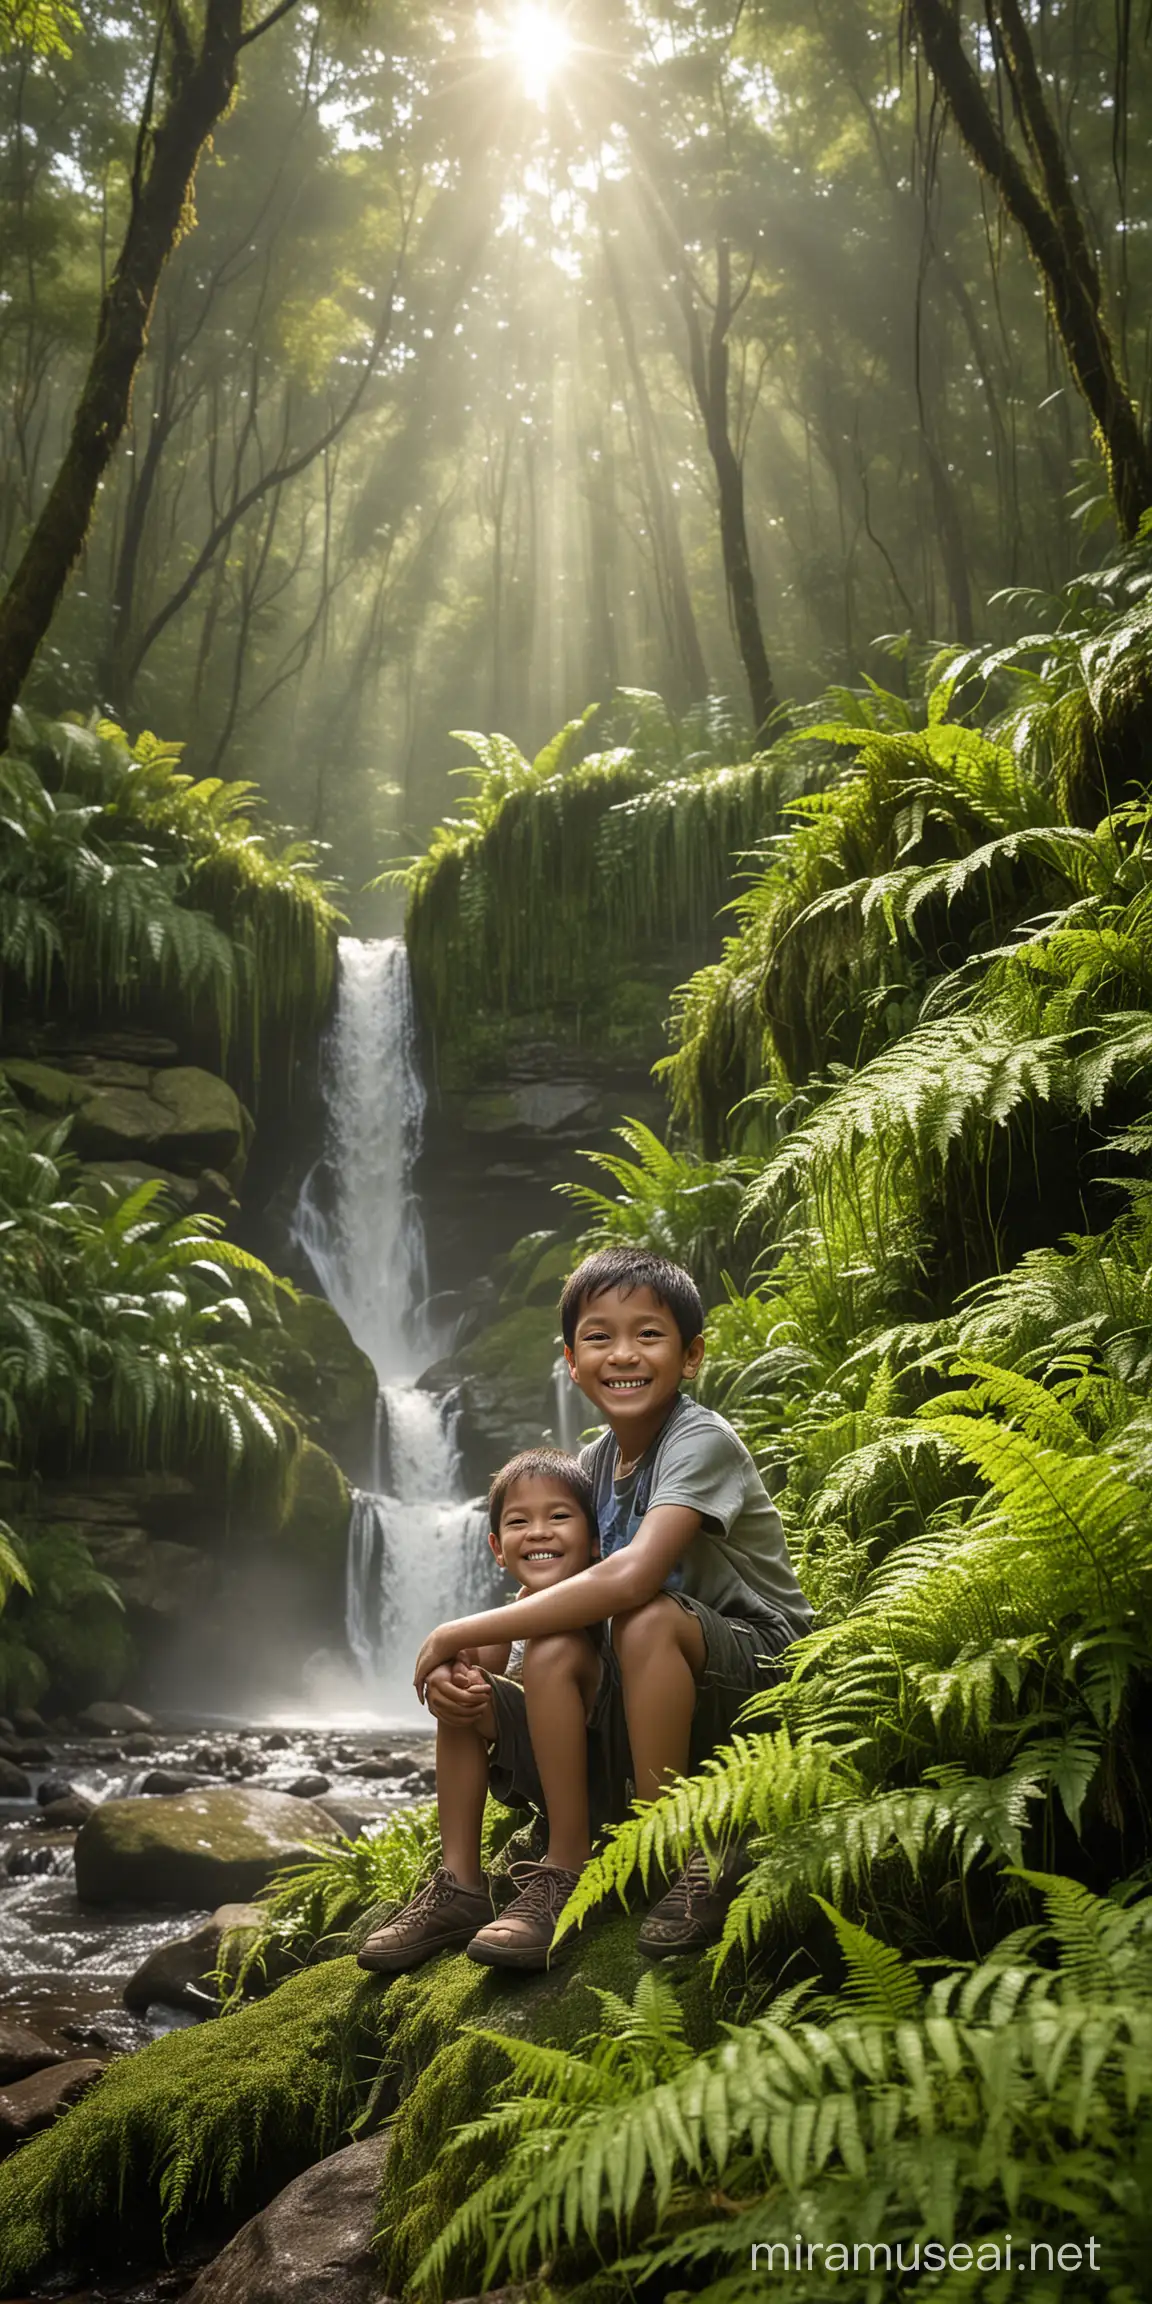 8 year old Indonesian young man sitting with his 2 year old boy on a rock facing the front camera while smiling in the middle of a forest filled with sunlight, sunlight penetrating between the leaves. Delicate dewdrops cling to ferns and wildflowers. In the background, a mystical waterfall cascades down moss-covered rocks, and mist rises into the air. High resolution, high realism.